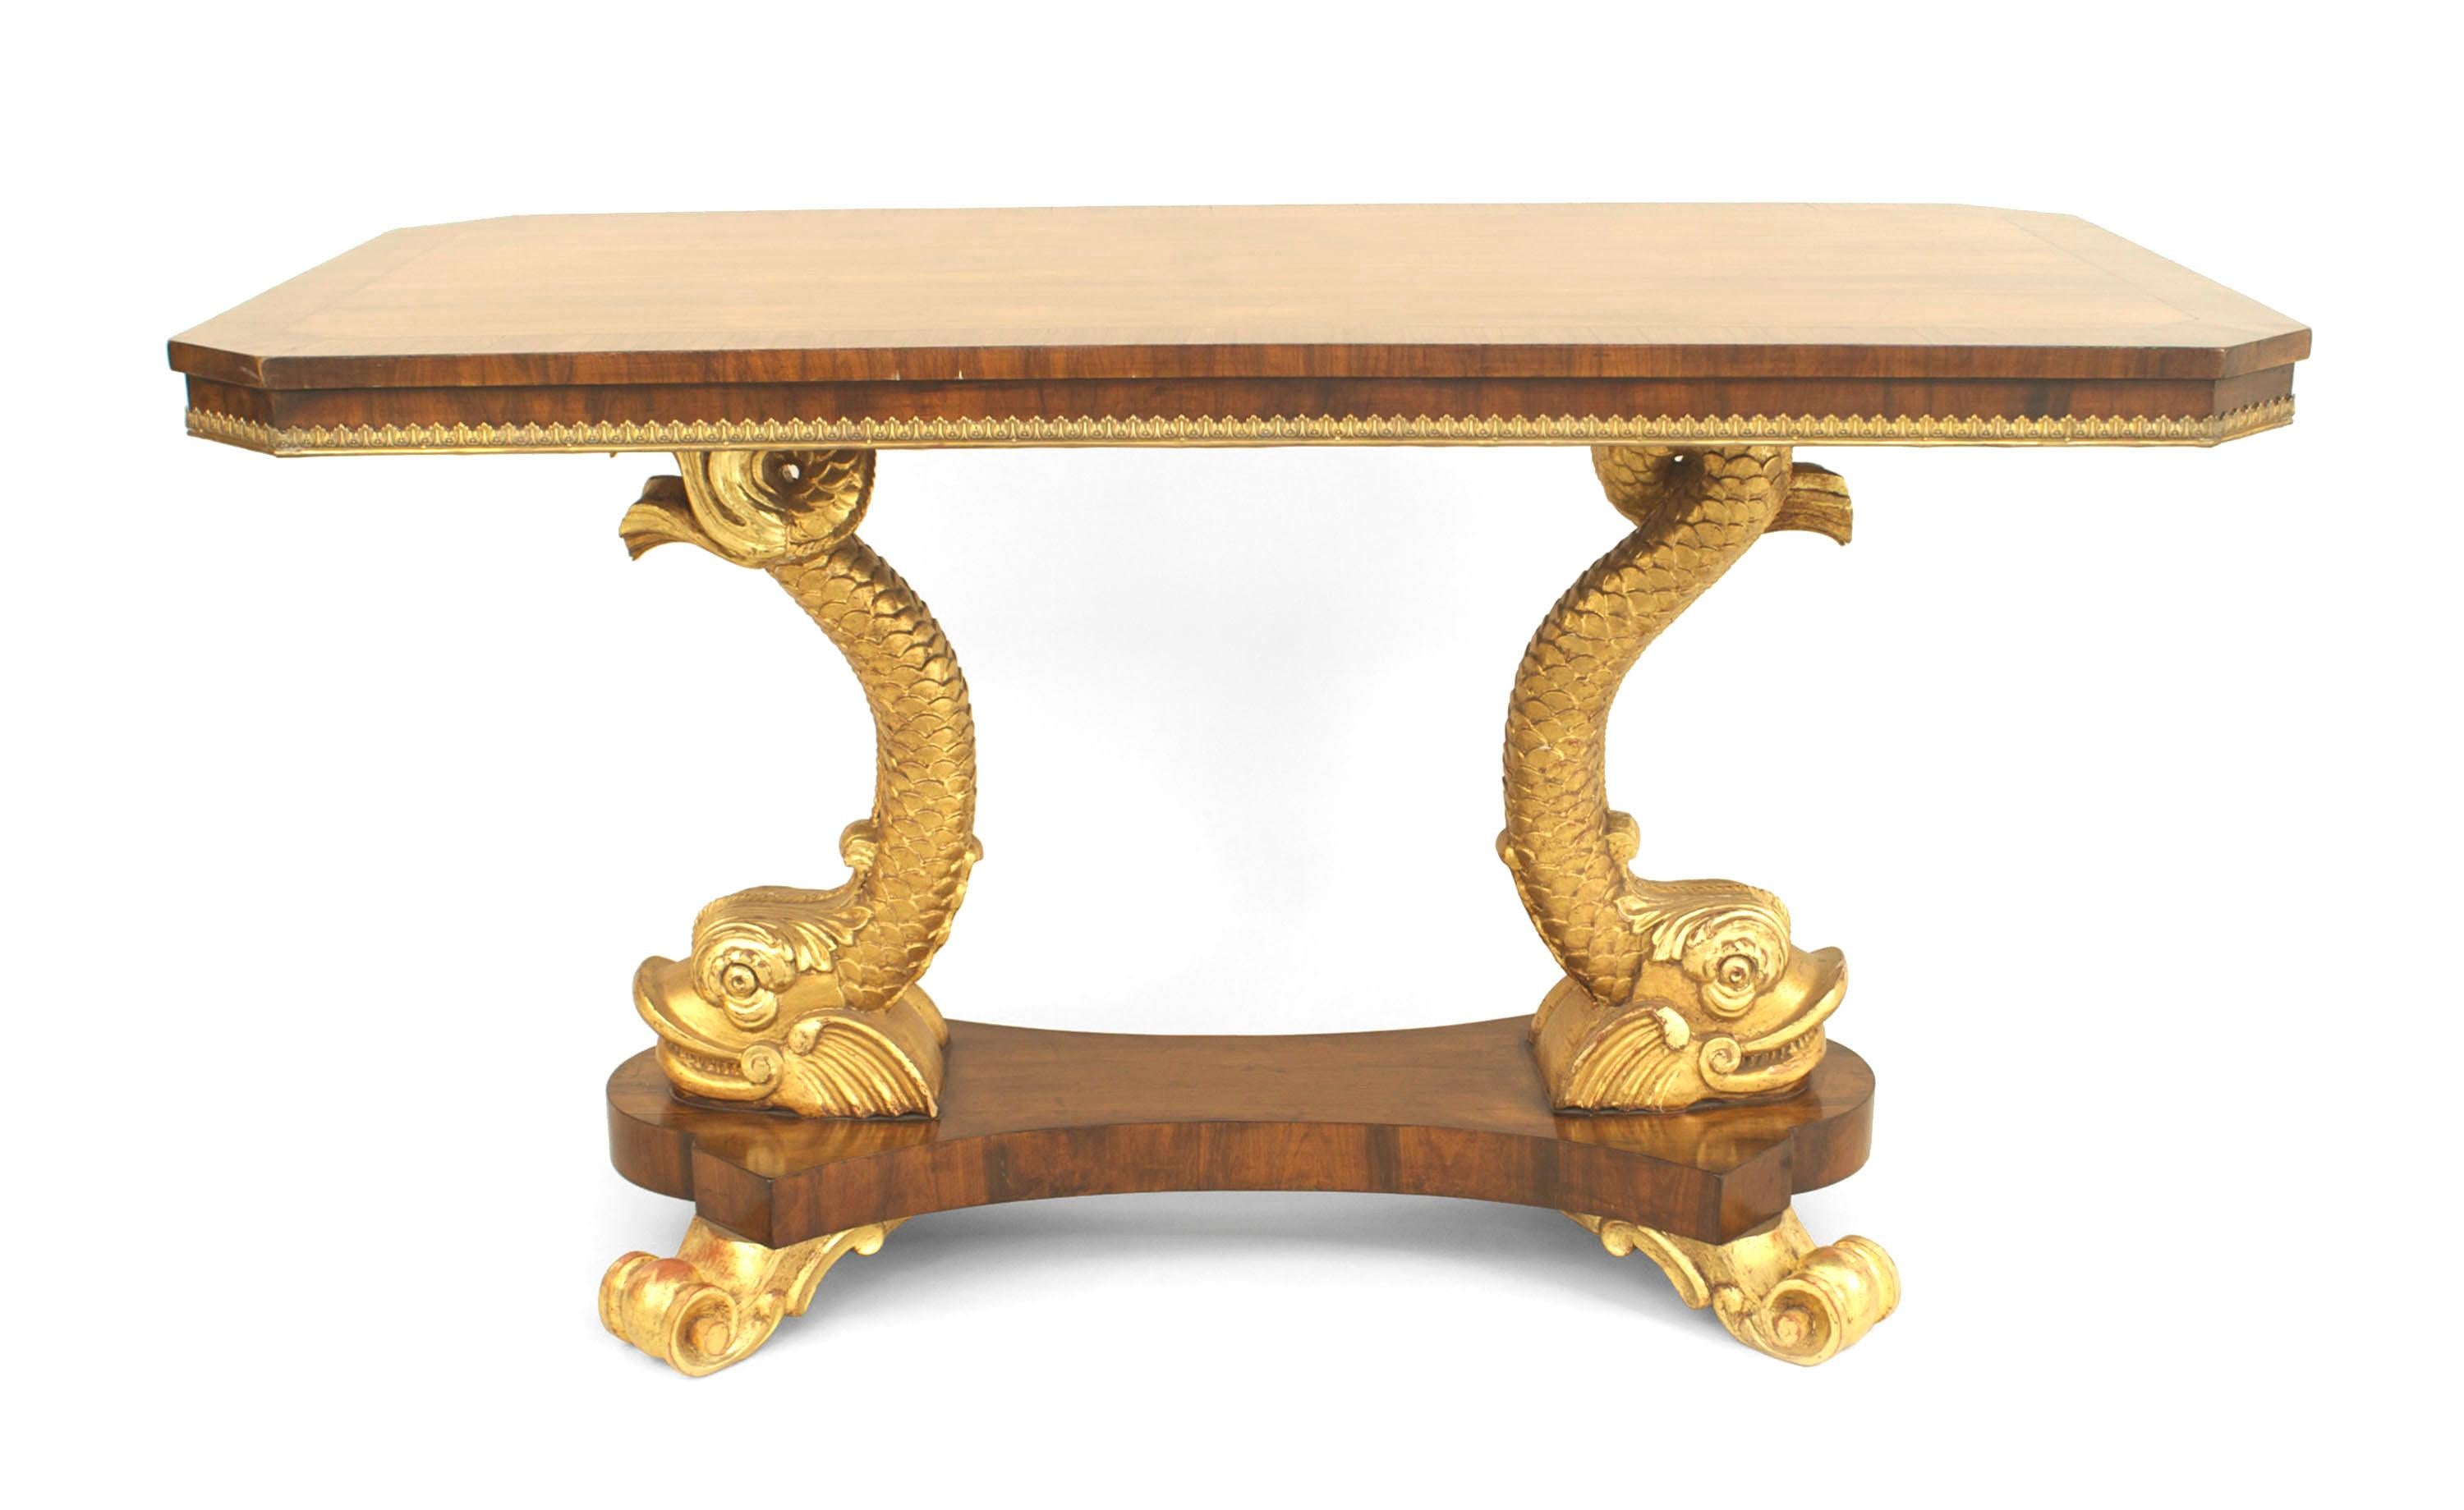 19th century English Regency style rosewood rectangular center table with brass trim on top and 2 carved gilt dolphins supported on platform base with gilt scroll feet.